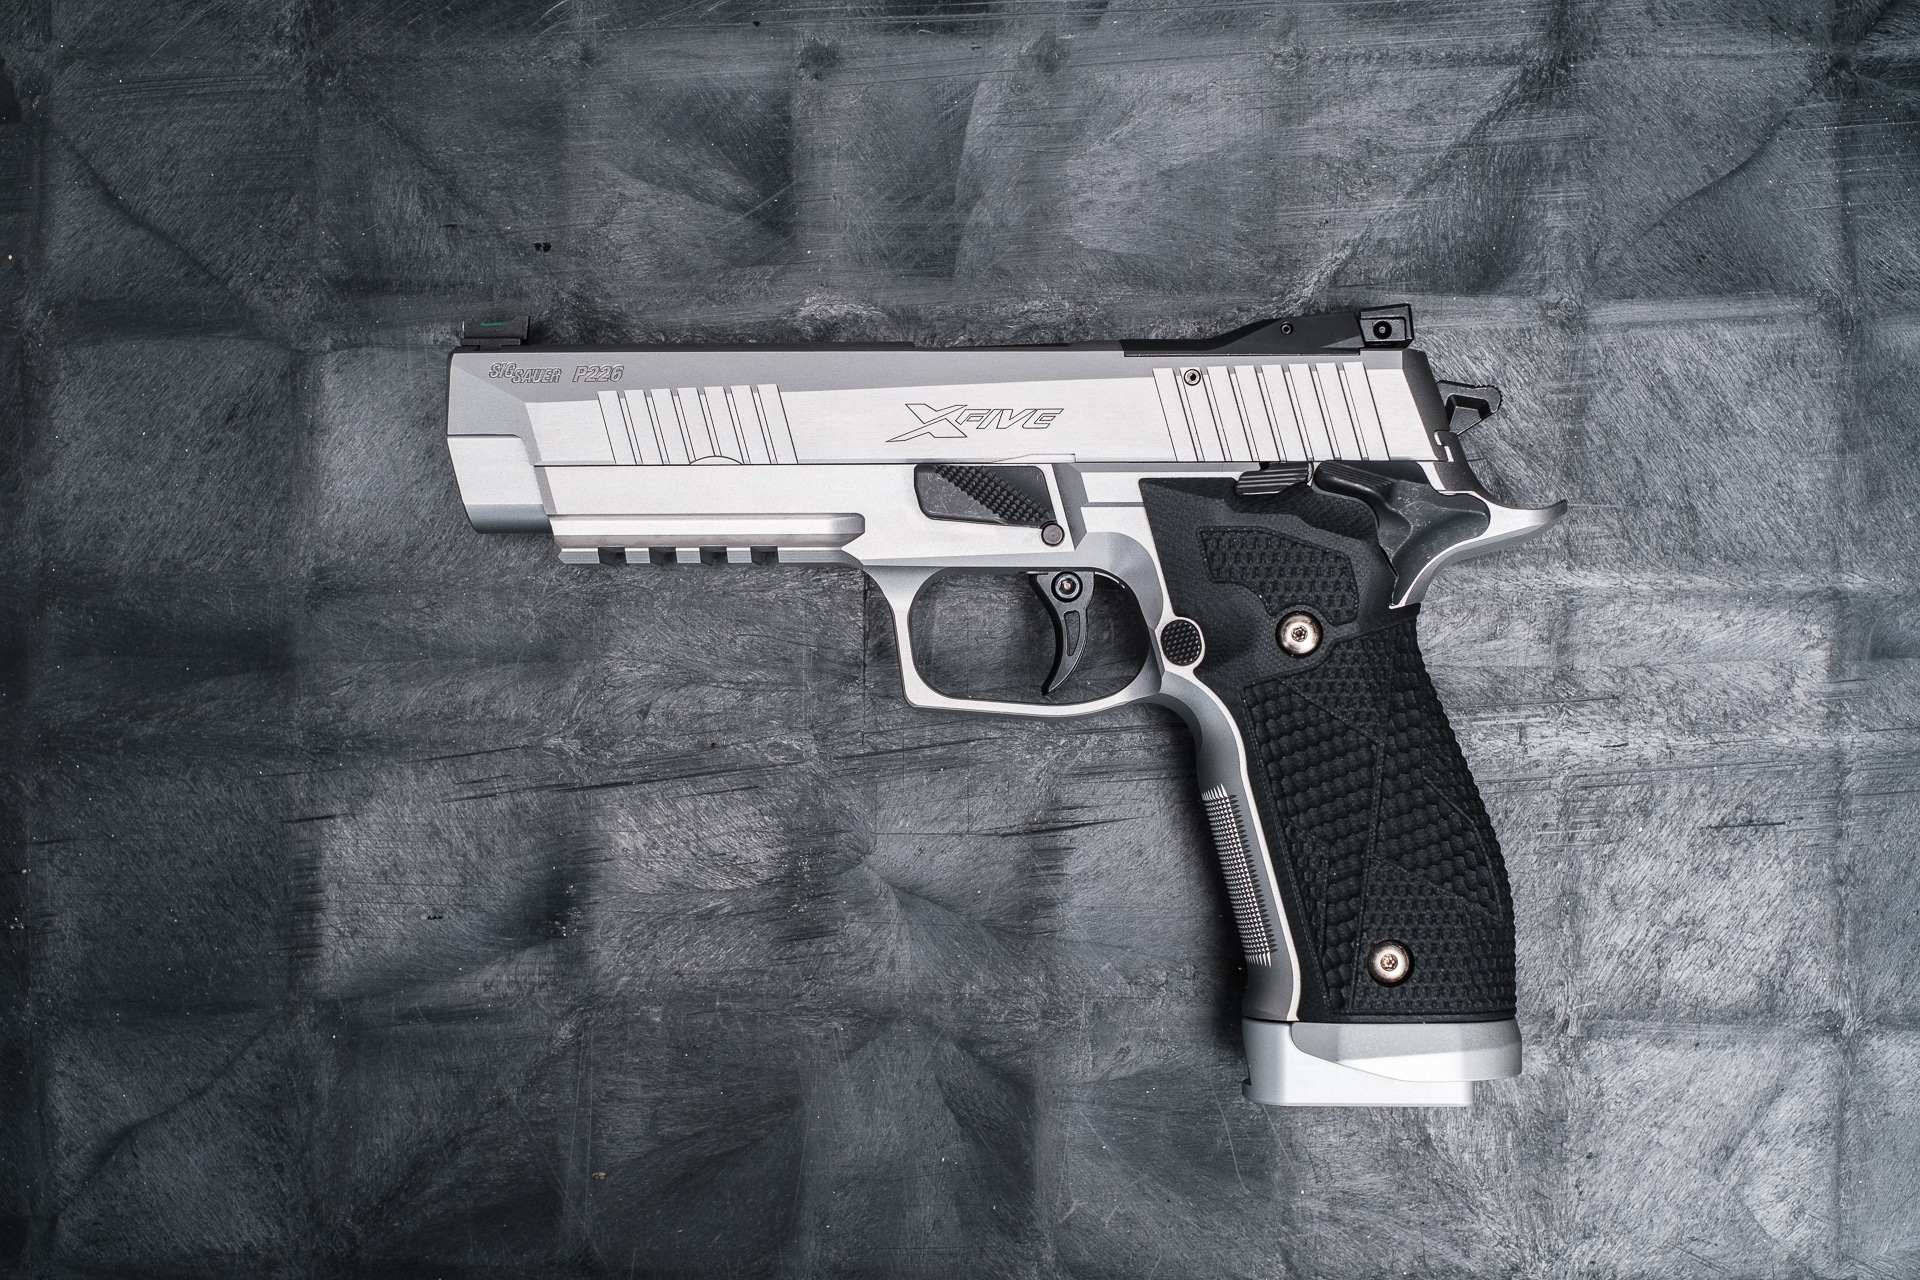 https://cityarsenal.com/product/sig-sauer-p226-x5-custom-9mm-pistol-sa-stainless-steel-frame-hogue-g10-piranha-grips-with-alloy-magwell-silver-226x5-9-stas/